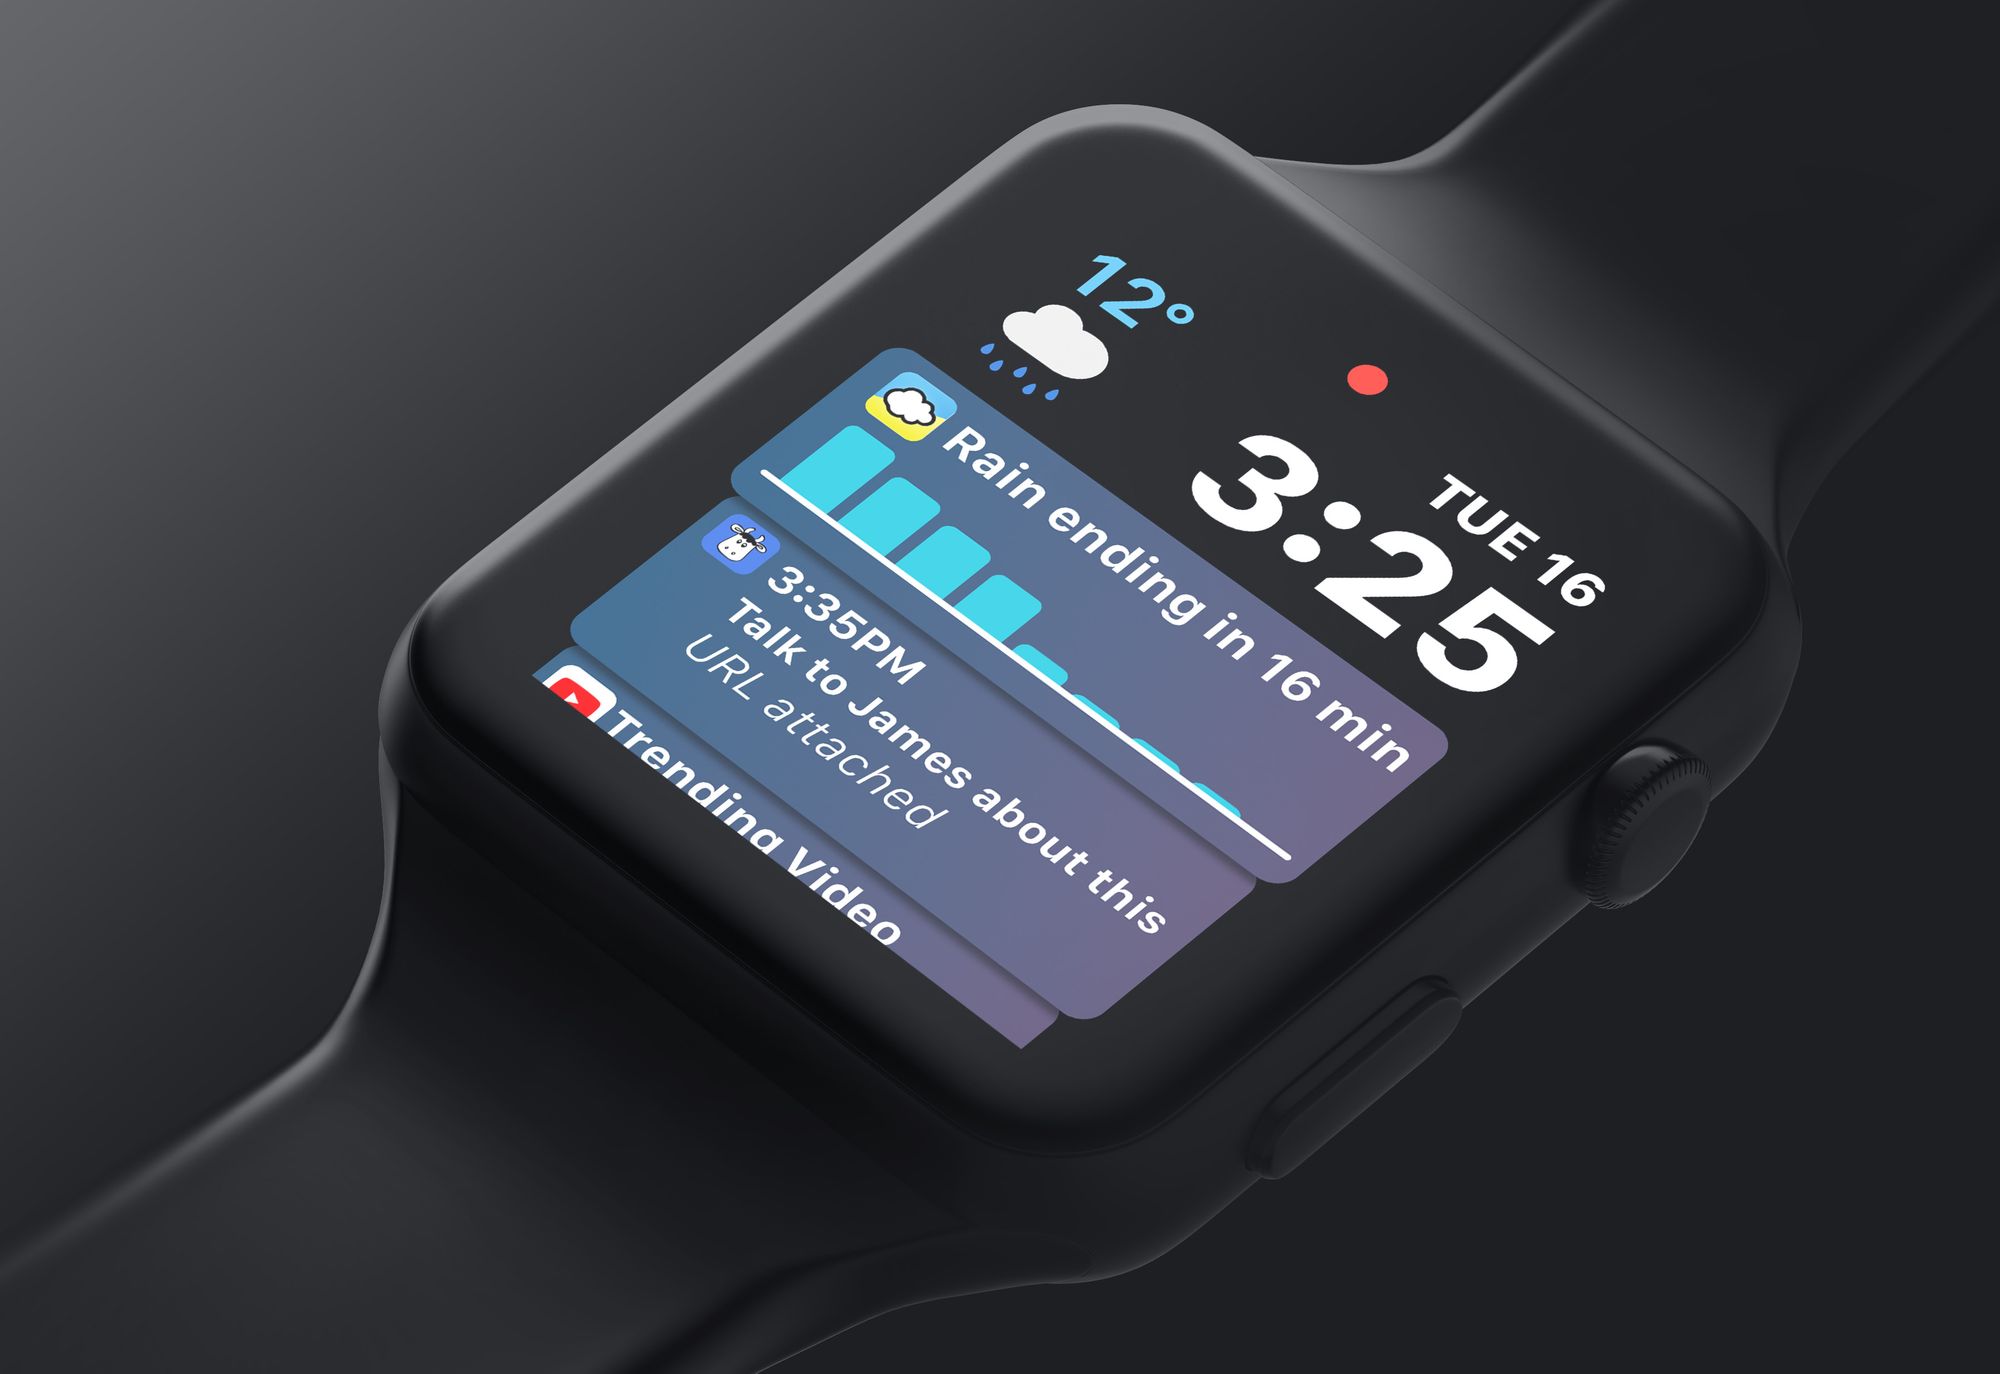 watchOS 5: A Relatively Modest Proposal